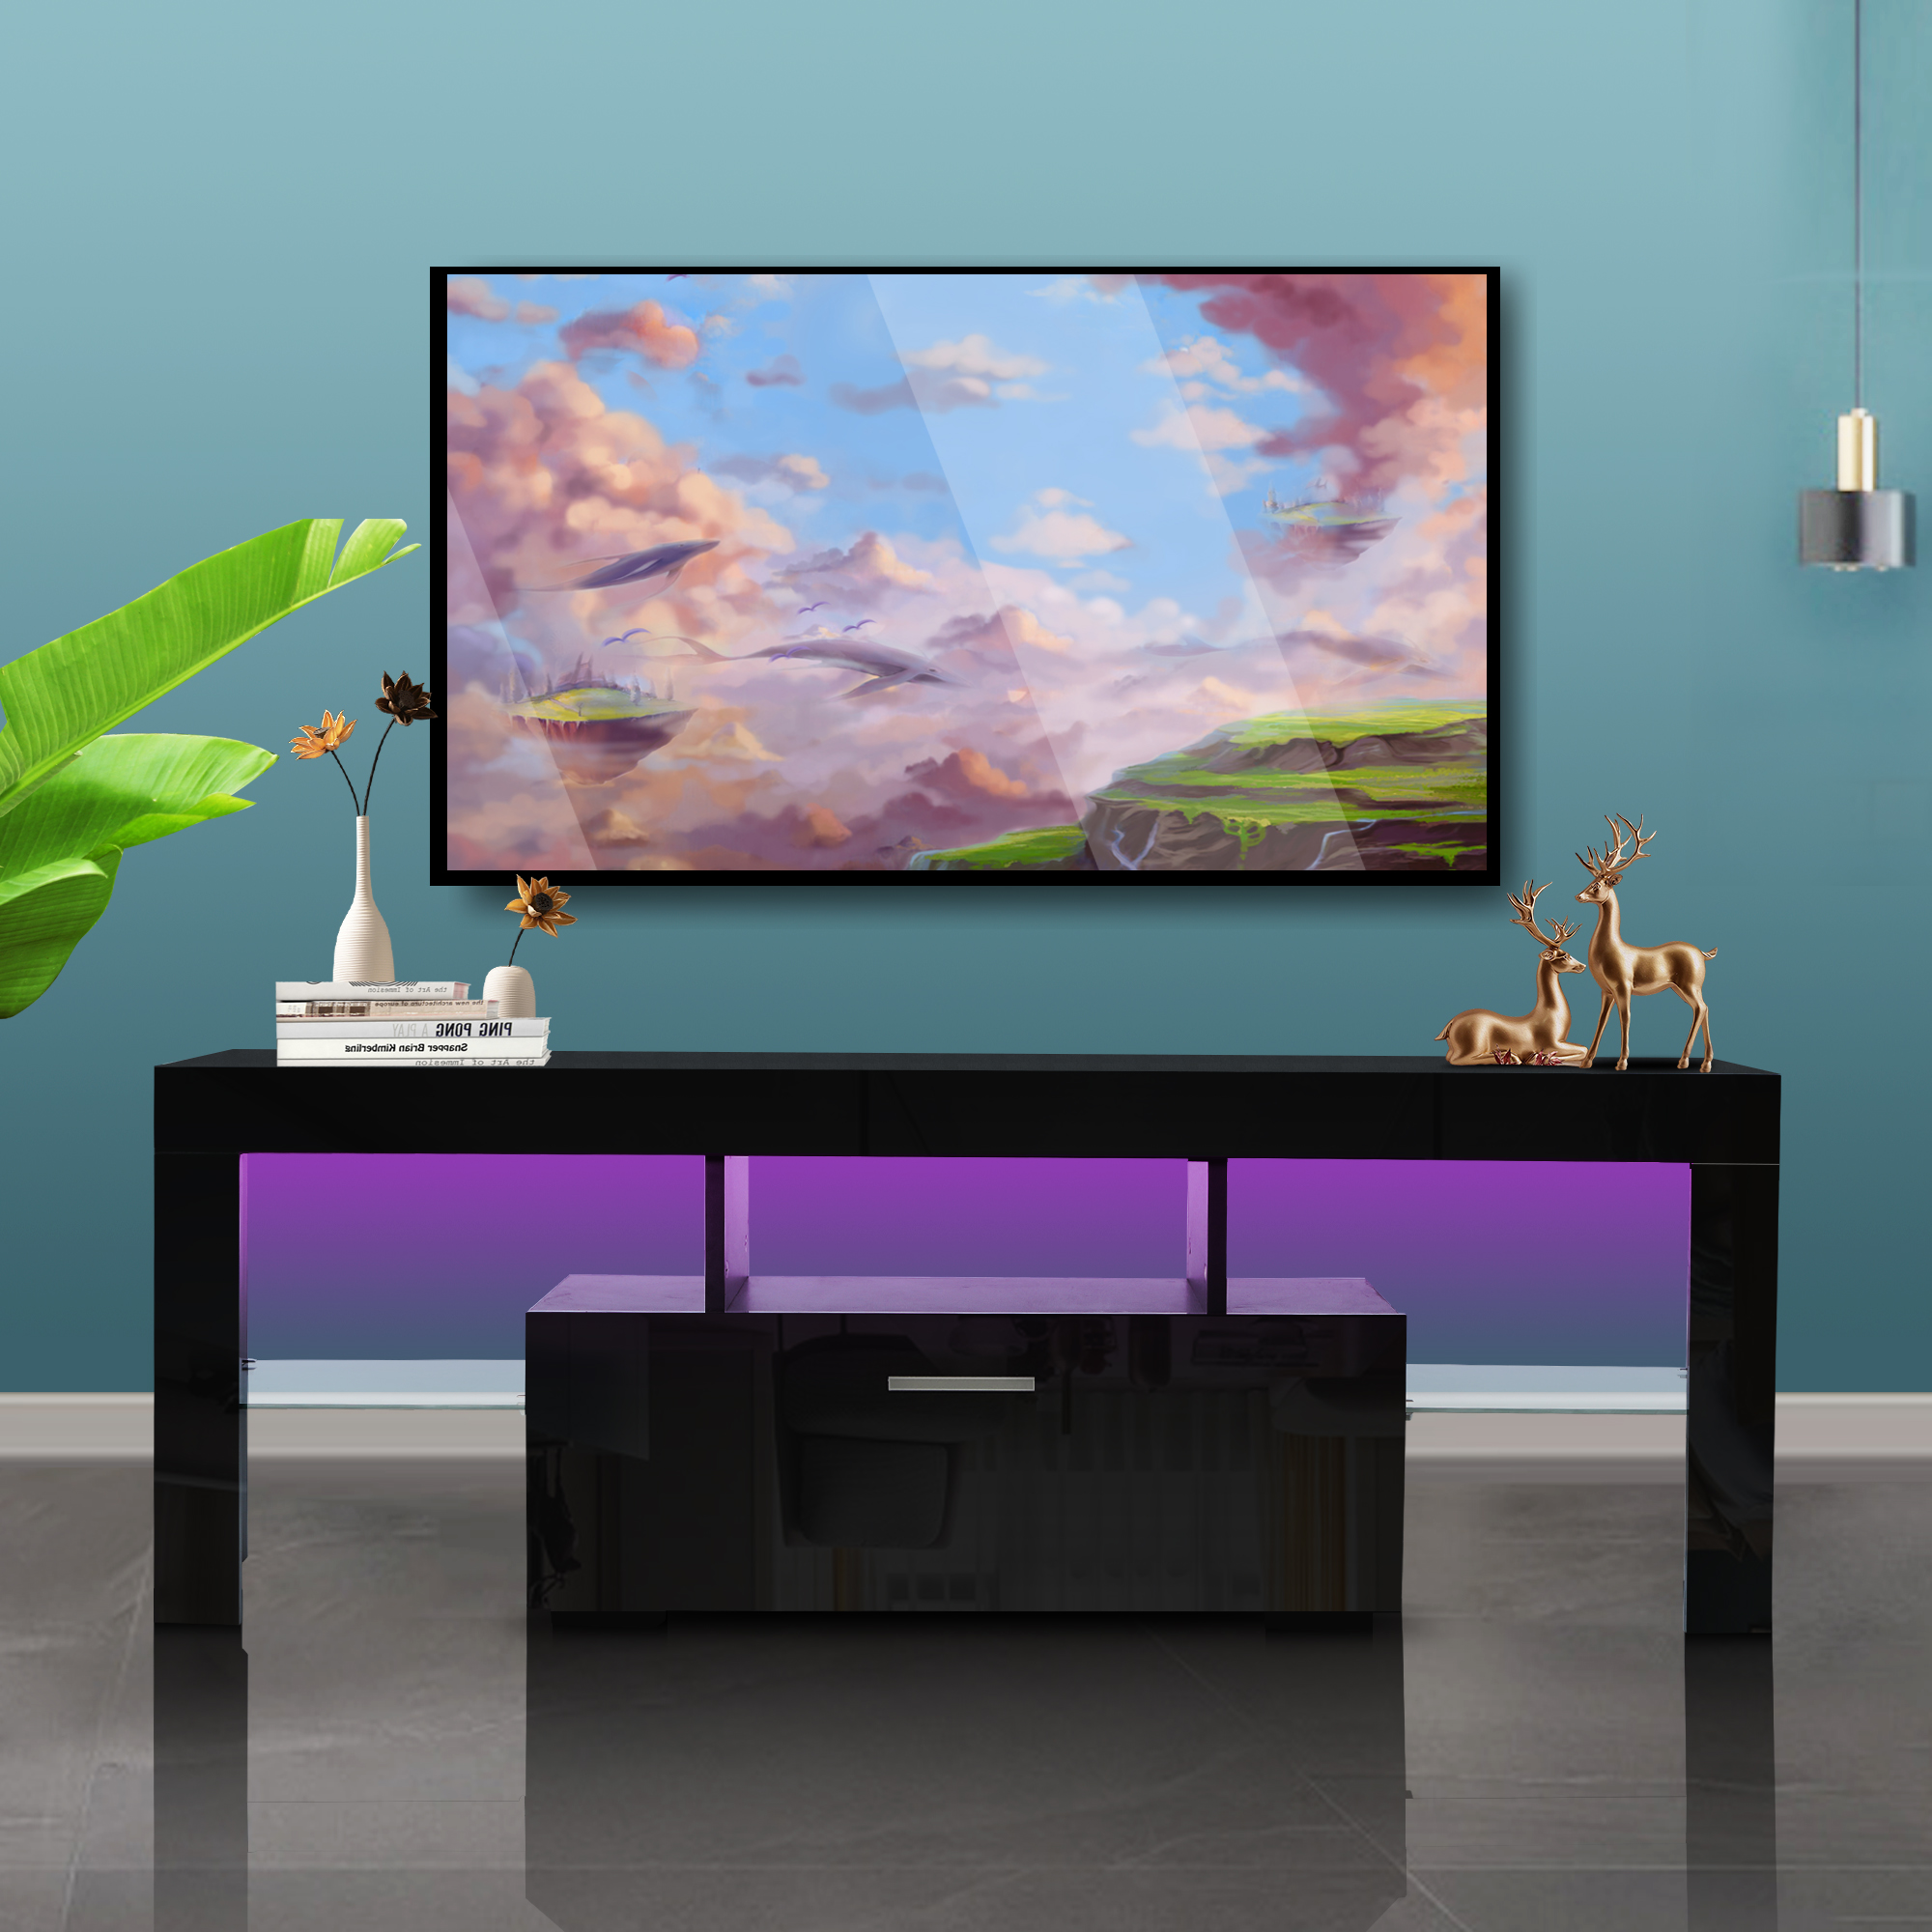 20 minutes quick assemble,Black morden TV Stand with LED Lights,high glossy front TV Cabinet,can be assembled in Lounge Room, Living Room or Bedroom,color:BLACK-Boyel Living